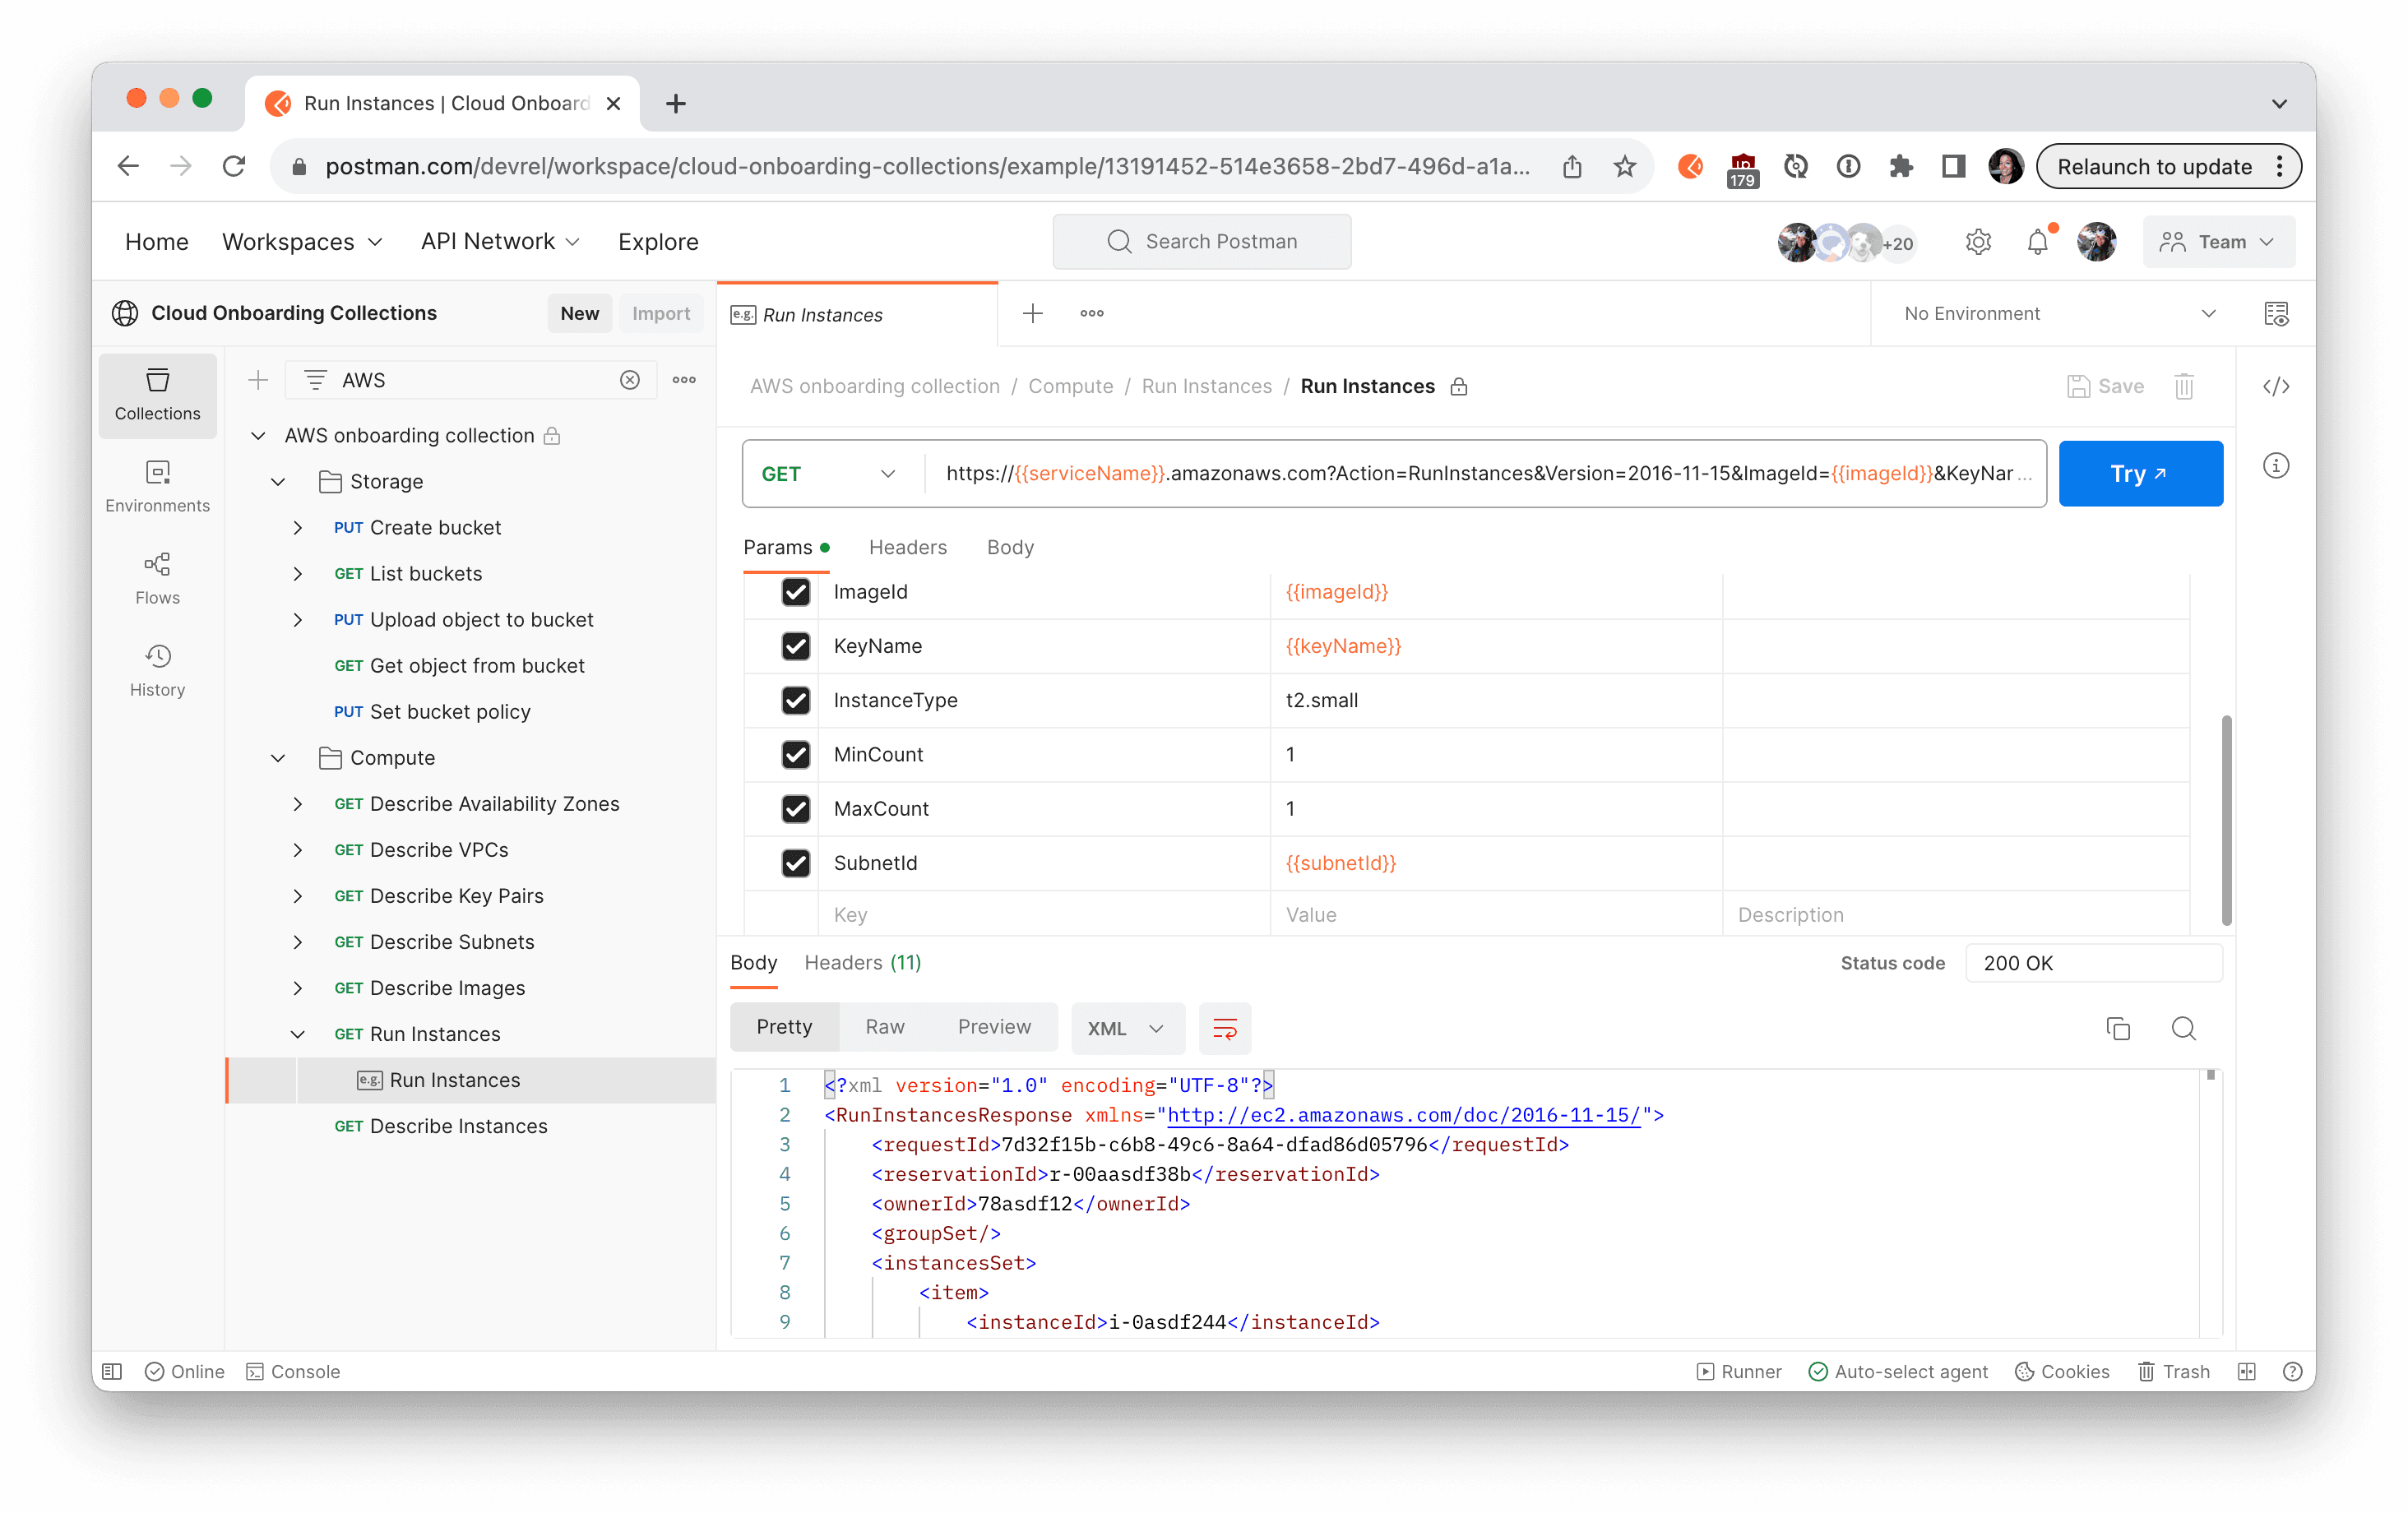 Fork the example collection to your own workspace to get started with S3, EC2, and set up an AWS authorization signature in Postman